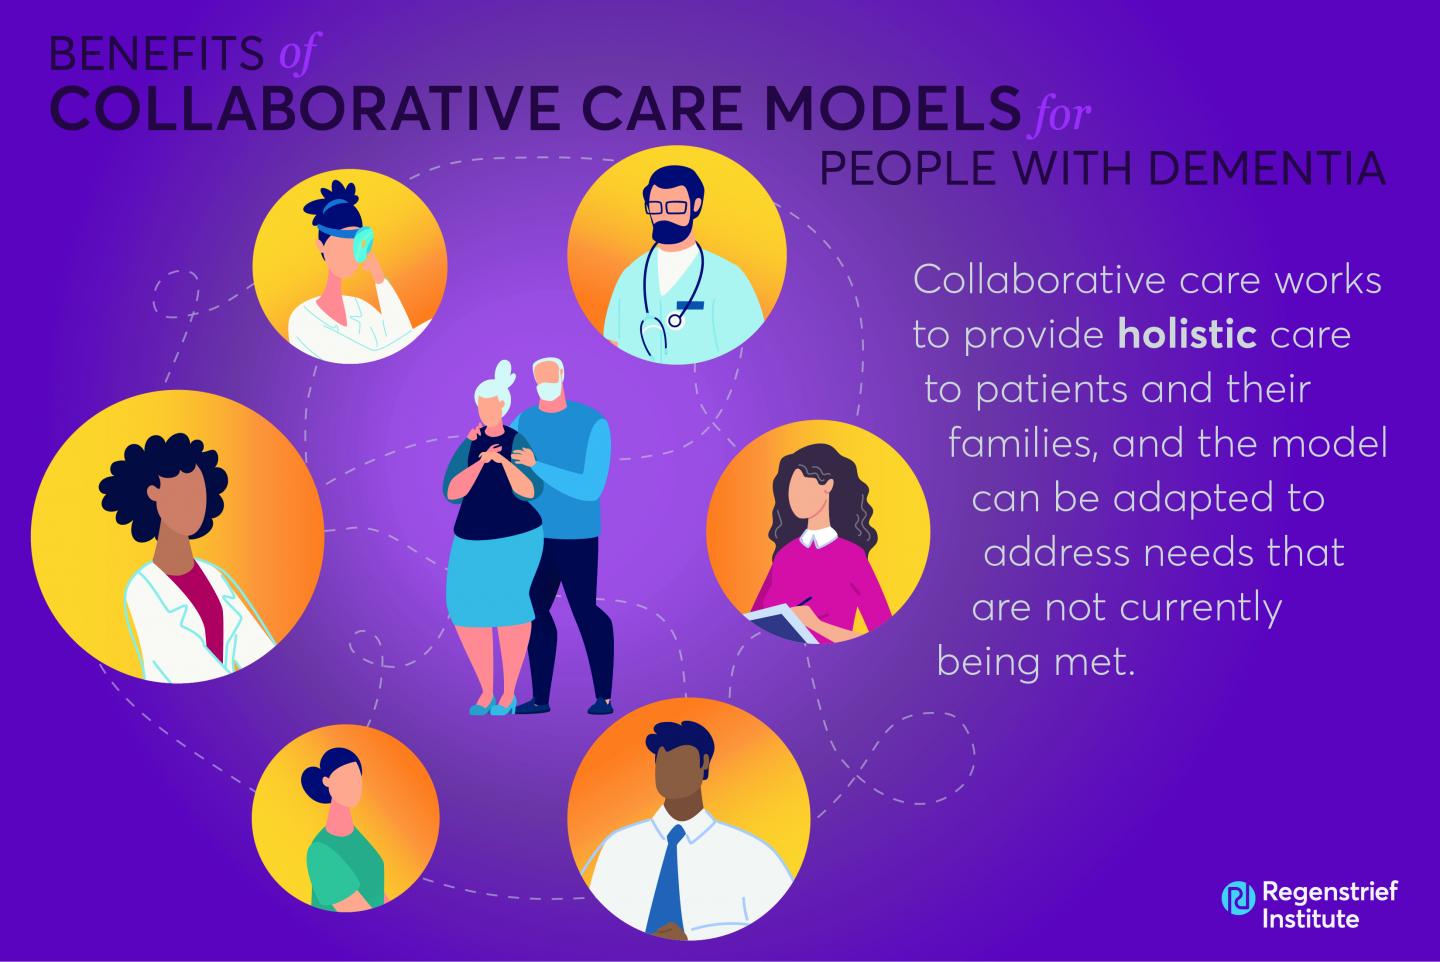 Collaborative Care Models for People With&#8239;Dementia&#8239;Are Beneficial